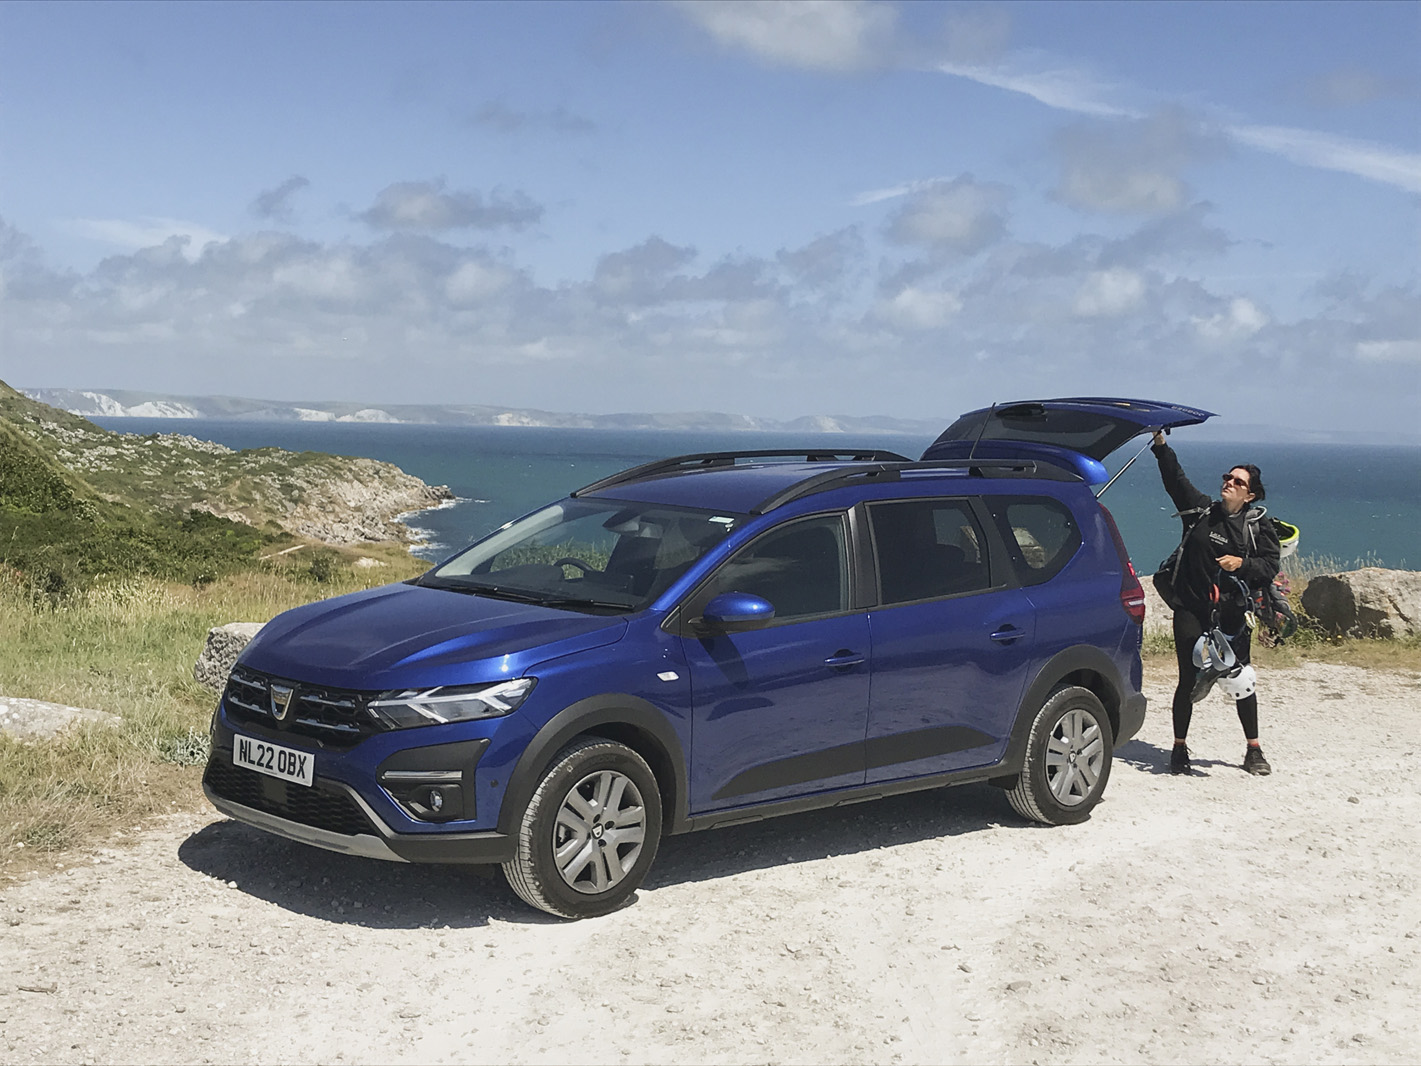 Dacia Jogger, with 7 seats and low price, enters hot compact SUV segment